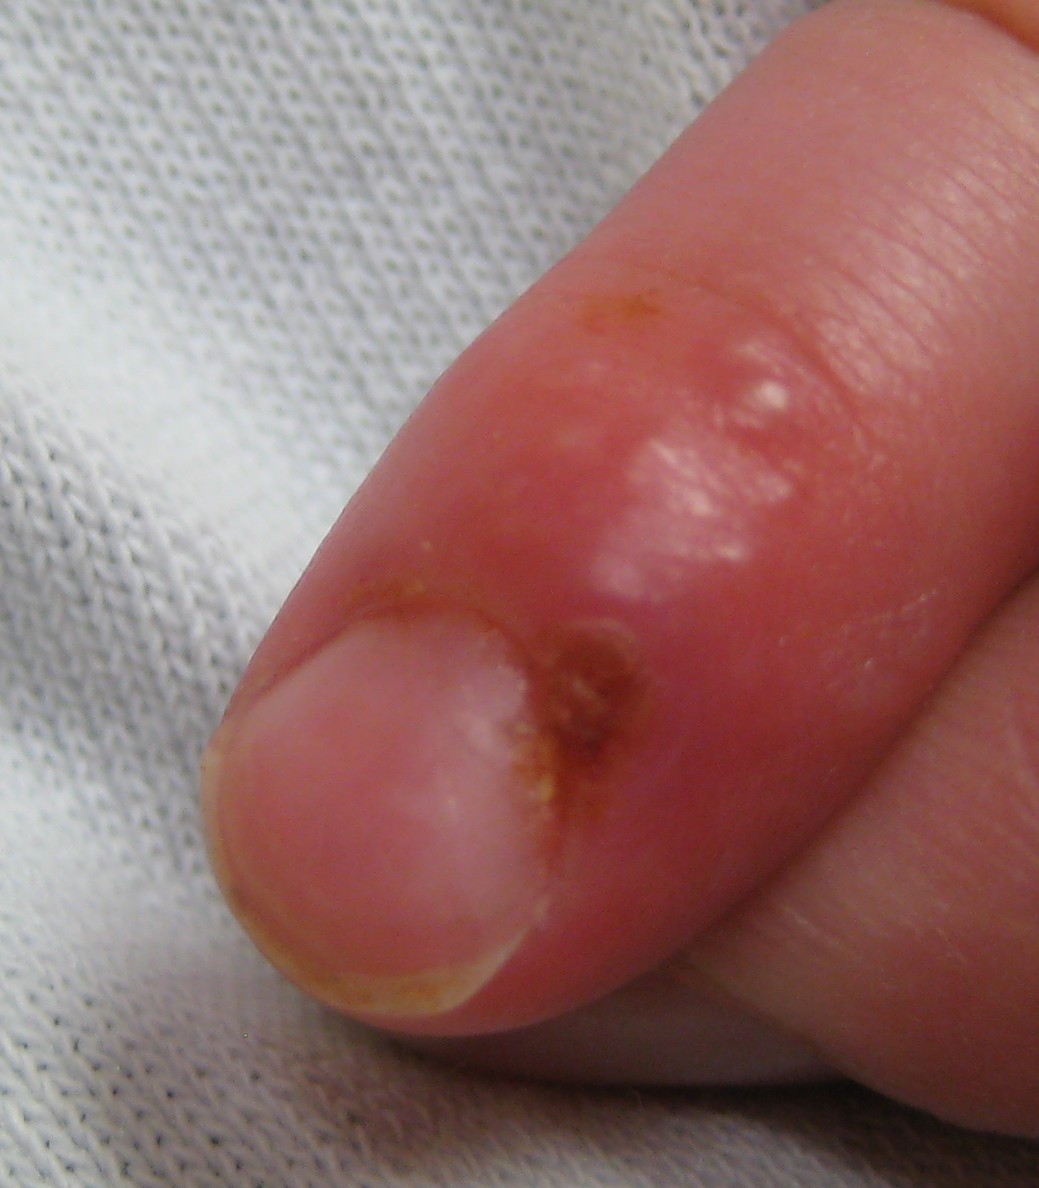 Herpetic whitlow in a young child who had earlier developed herpes gingivostomatitis